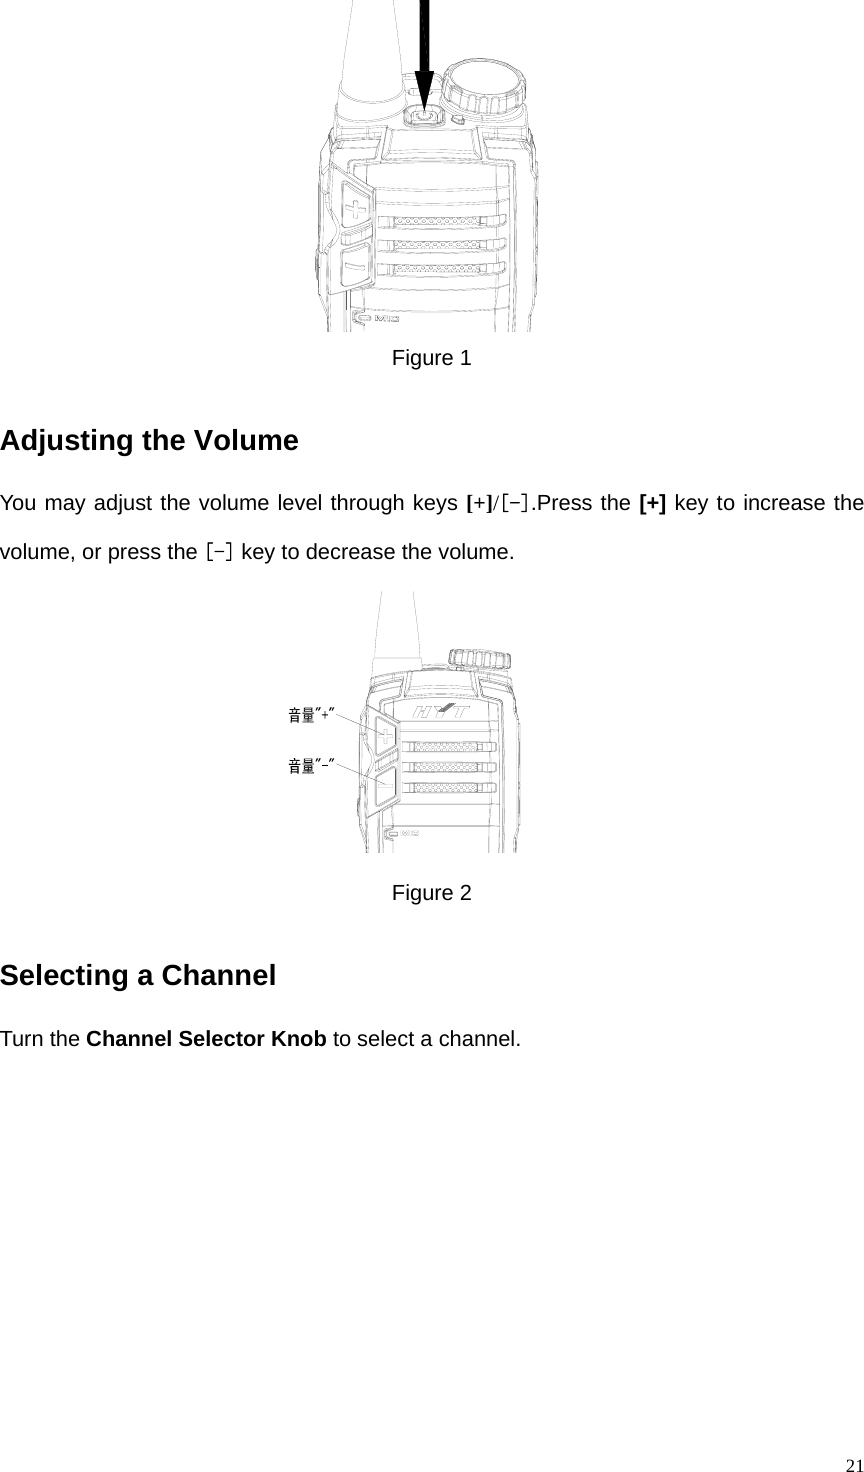   21 Figure 1 Adjusting the Volume You may adjust the volume level through keys [+]/[-].Press the [+] key to increase the volume, or press the [-] key to decrease the volume.  Figure 2 Selecting a Channel Turn the Channel Selector Knob to select a channel.    